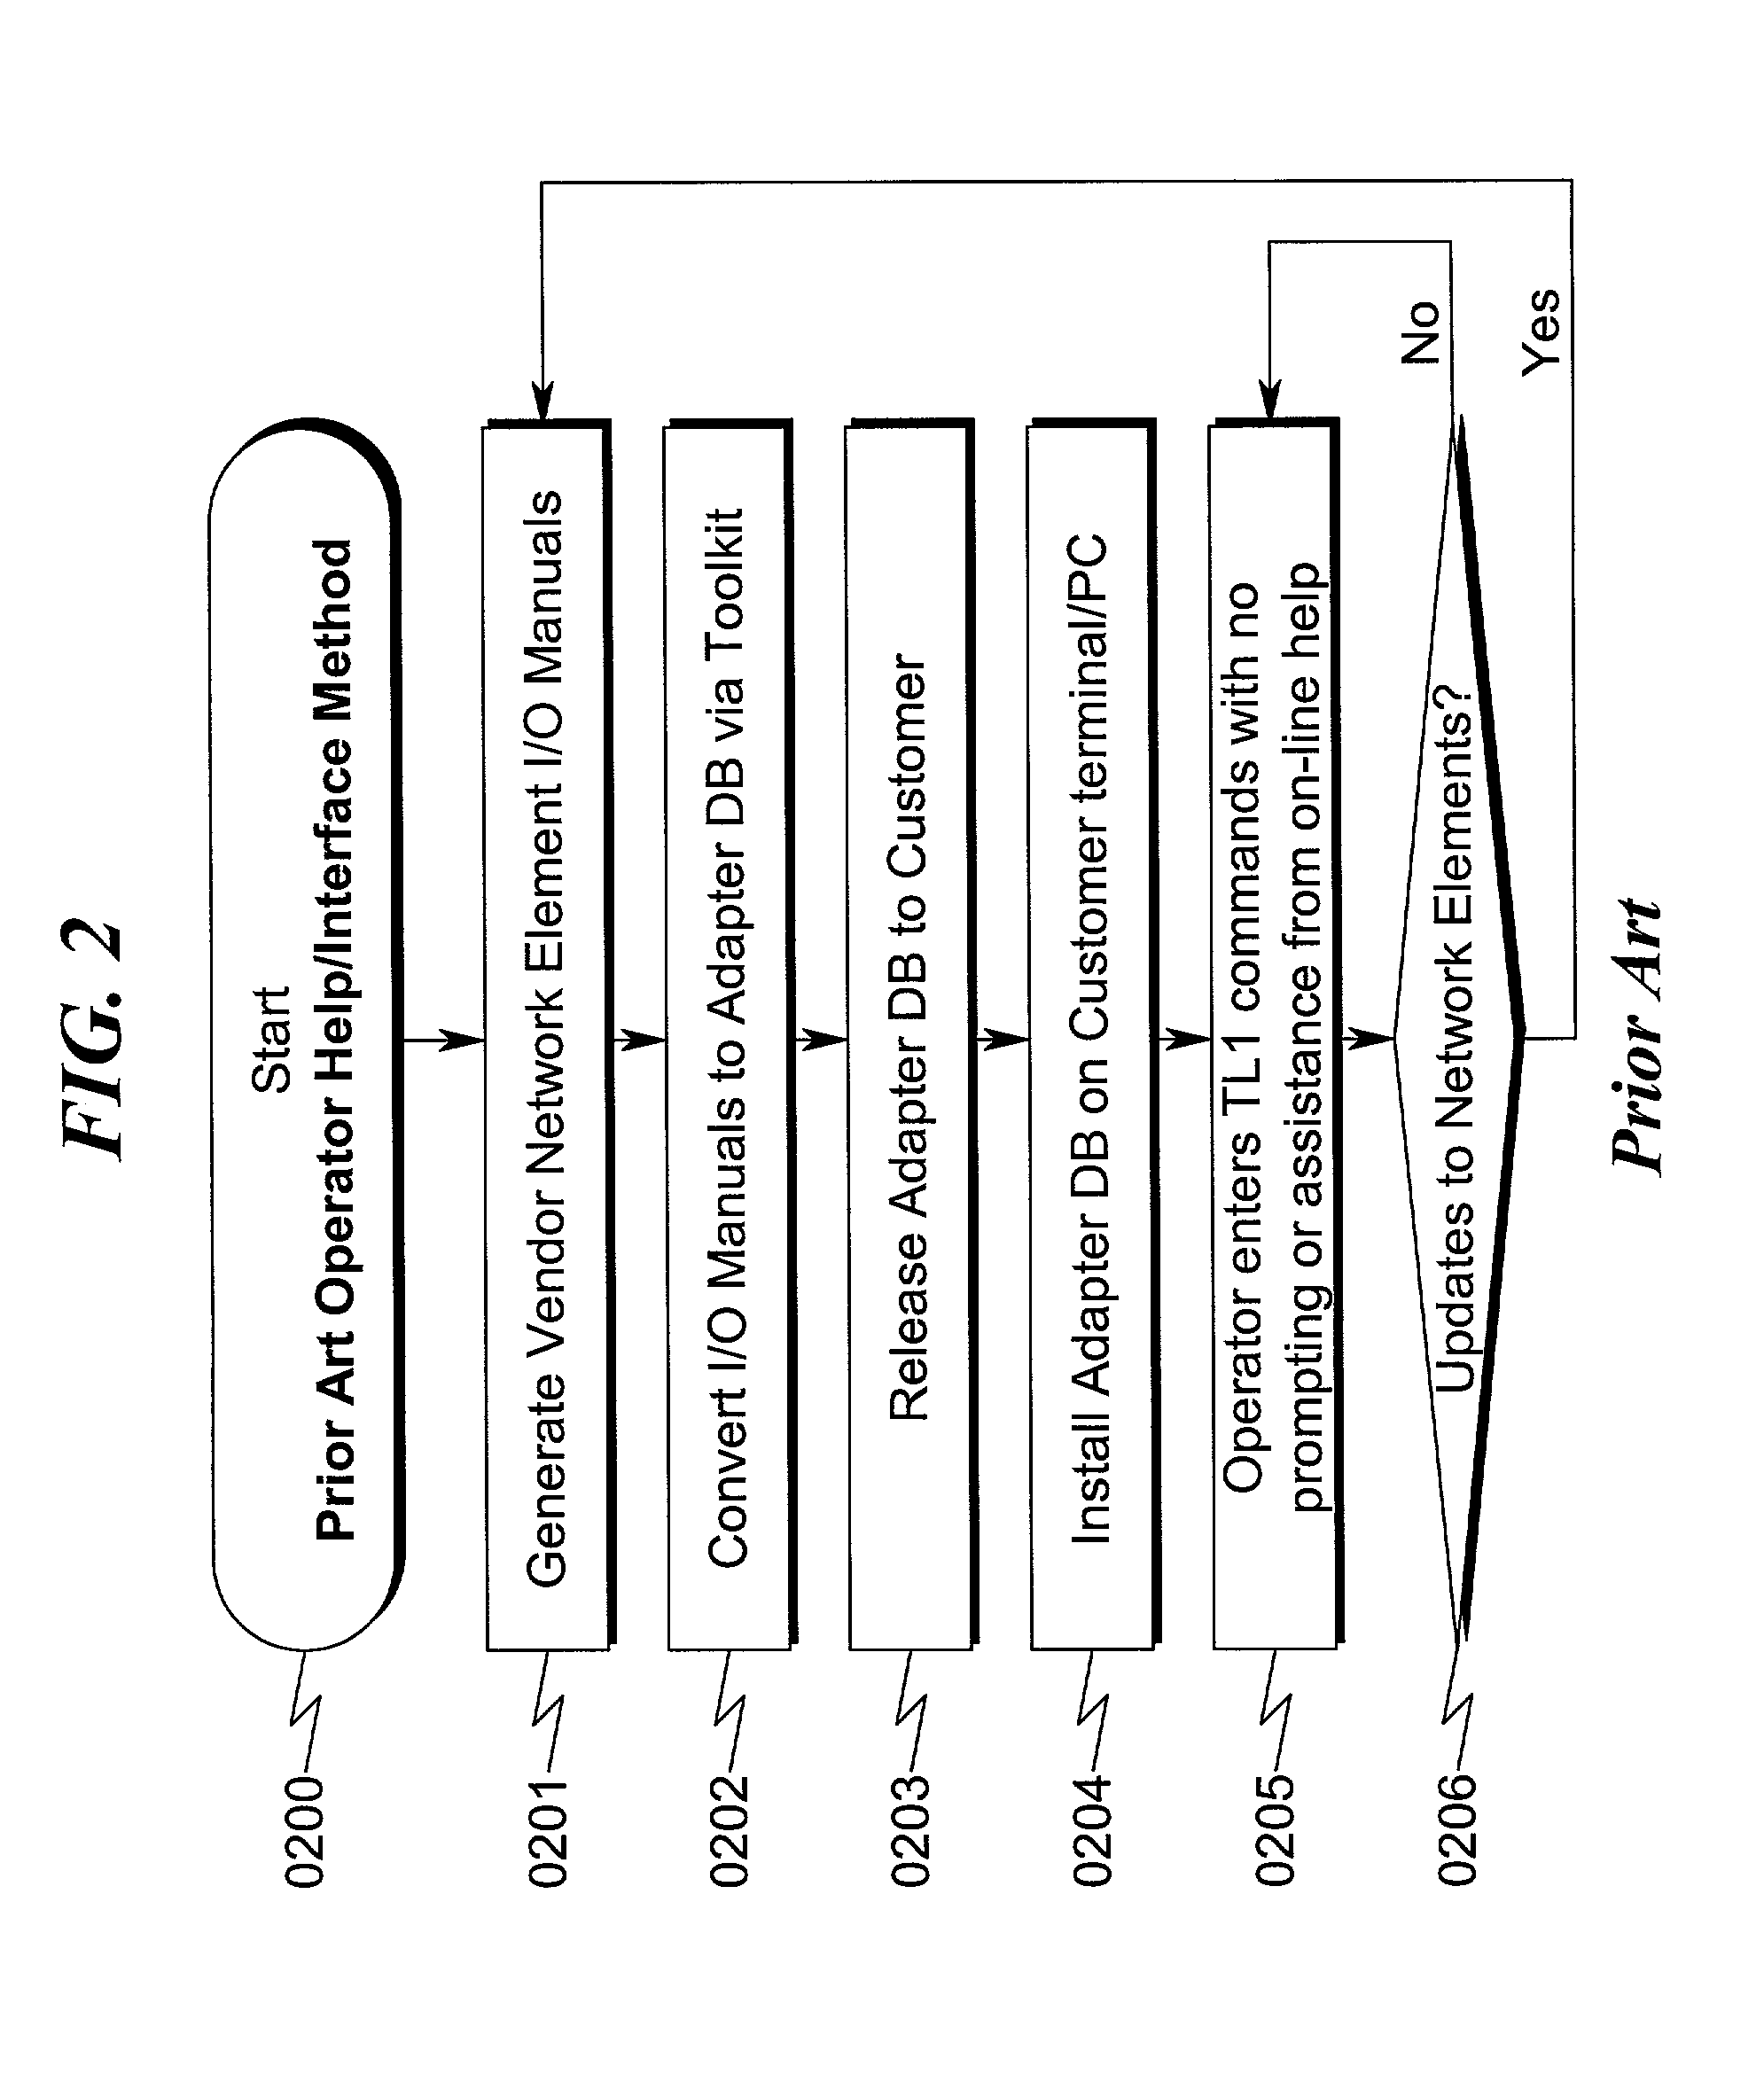 Network element terminal data interface system and method